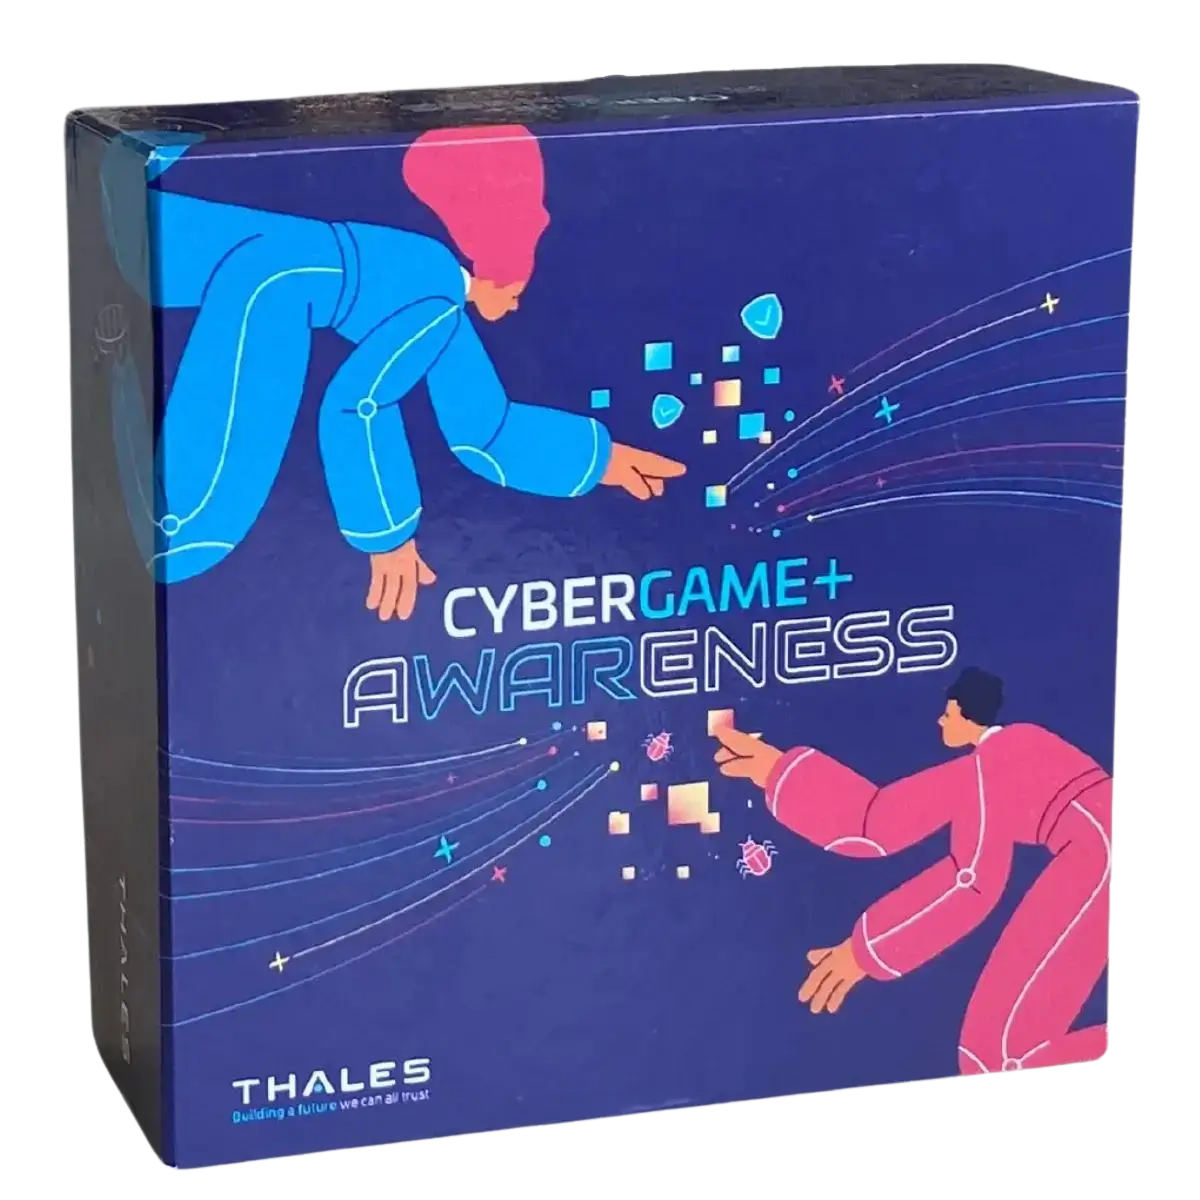 CyberGame aWAReness est une personnalisation complète du serious game Cyber Wargame pour Thales. / CyberGame aWAReness is a complete customization of the Cyber Wargame serious game for Thales.